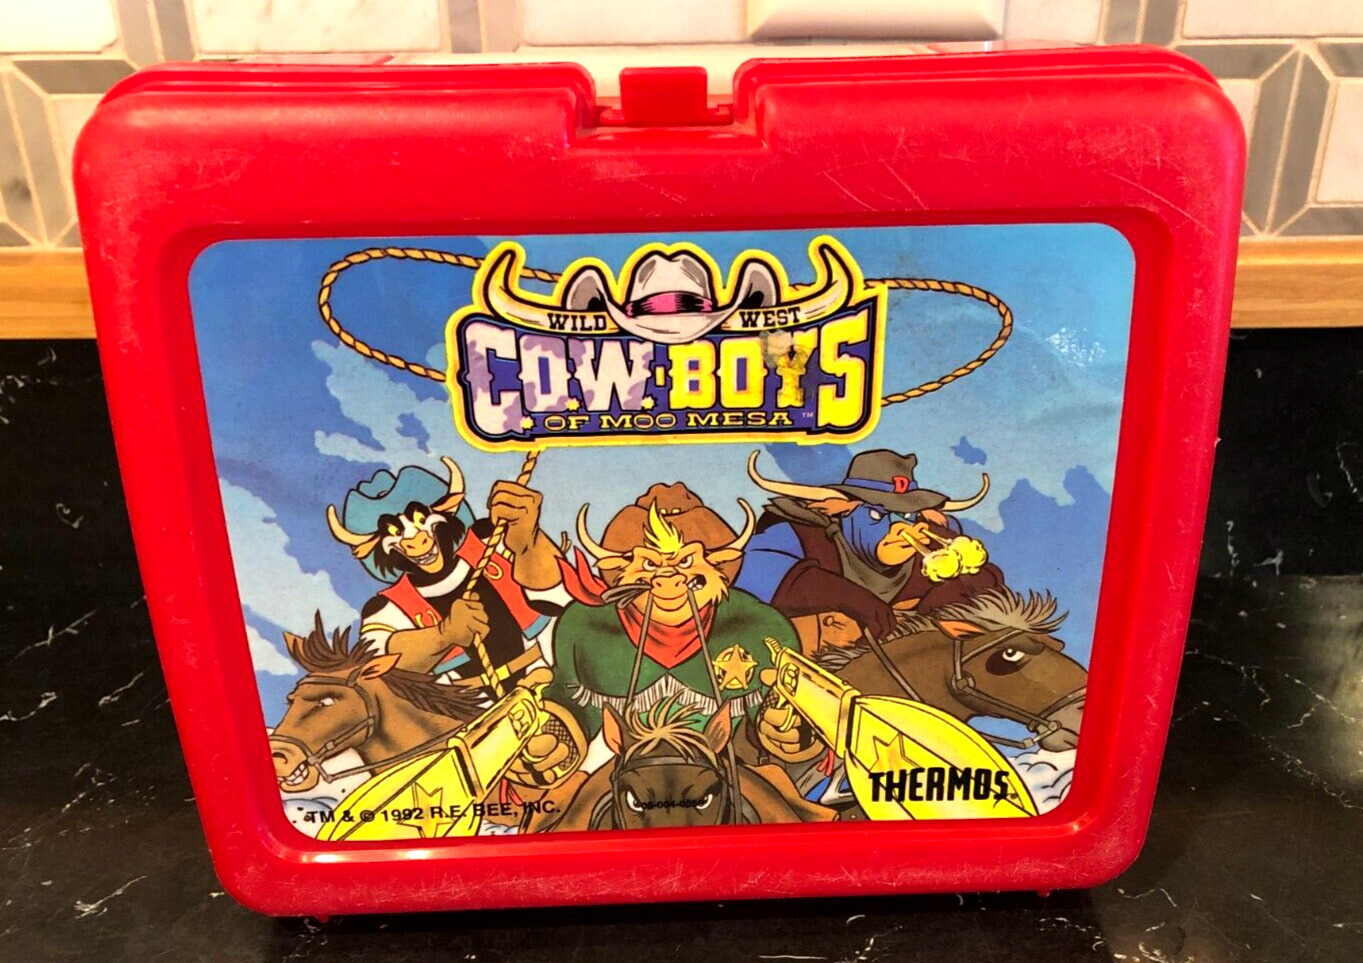 1992 Vintage Wild West Cowboys of Moo Mesa Thermos Lunchbox R.E. Bee, Inc